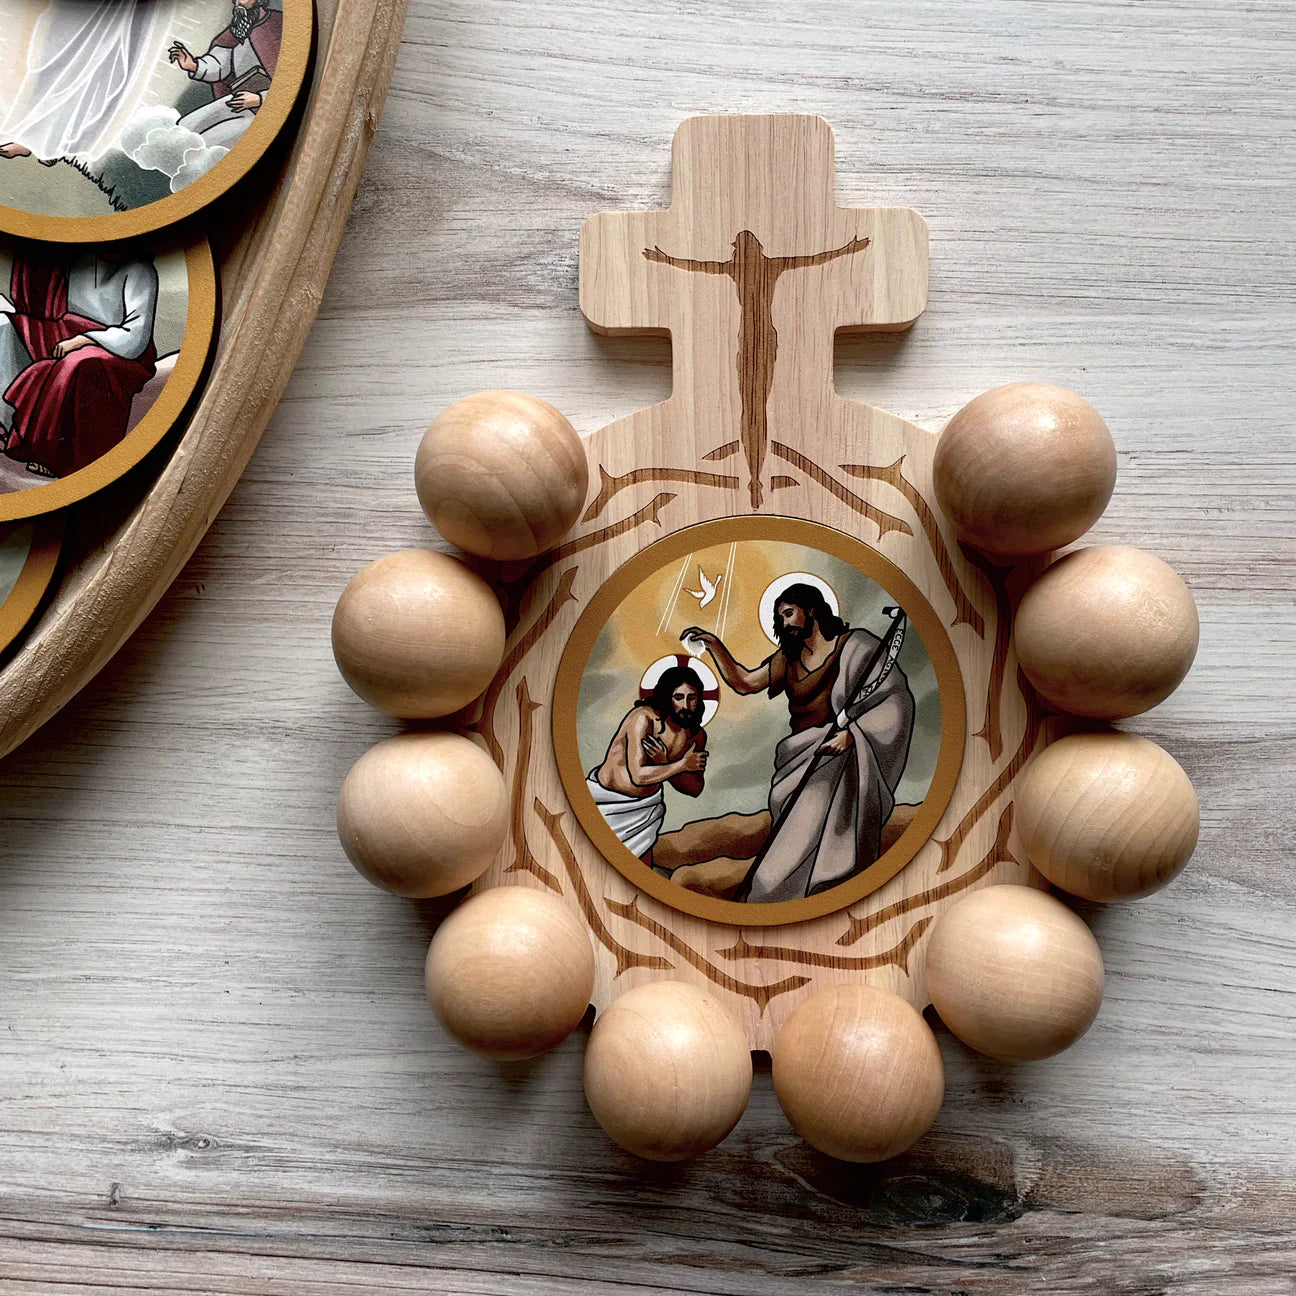 Wooden Decade Rosary Board *SALE*